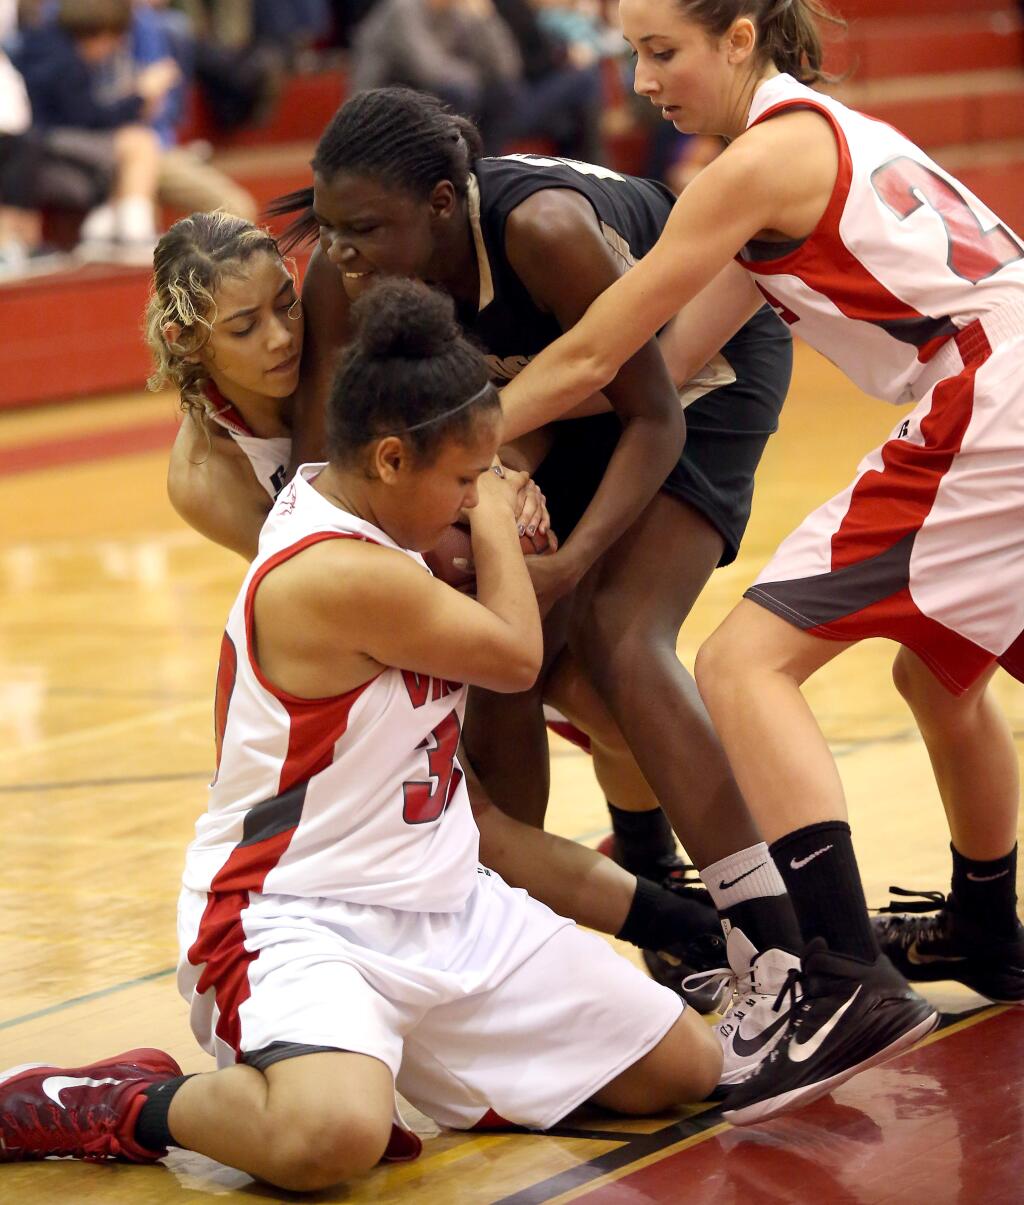 Windsor's Jessica Barbosa, center top, fights for the ball against Montgomery's LaDonna Saint Louis, left, Jazmin Basmajian, center bottom and Paige Raven, right, during the game held at Montgomery High School, Friday, February 6, 2015. (Crista Jeremiason / The Press Democrat)